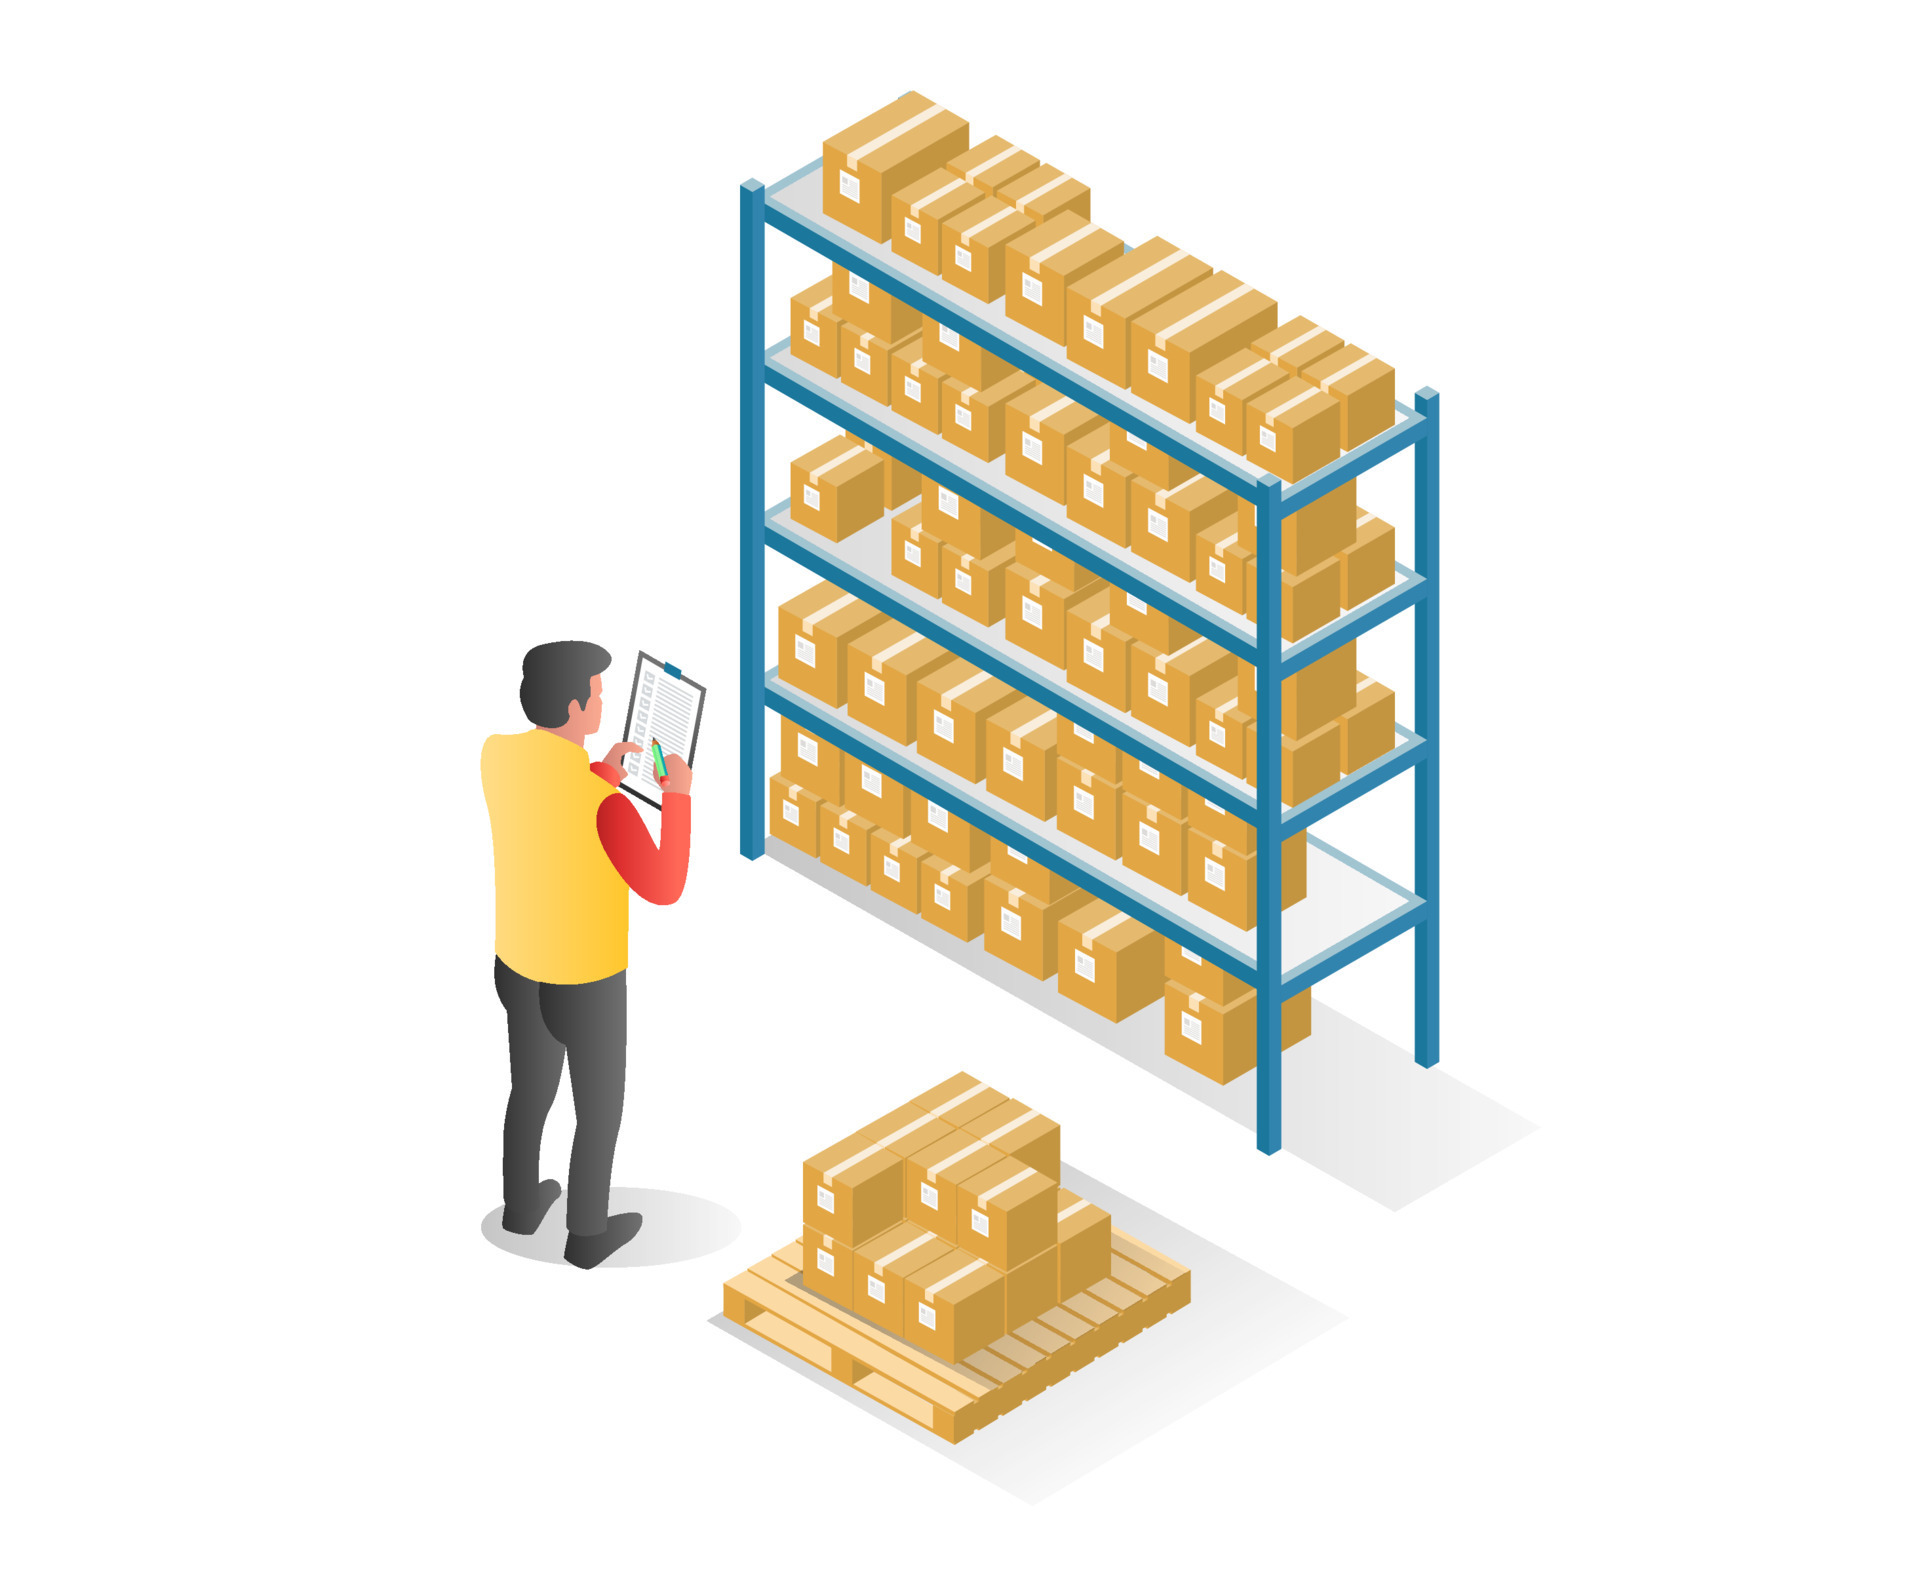 https://static.vecteezy.com/system/resources/previews/007/885/758/original/flat-isometric-illustration-concept-the-man-takes-notes-and-checks-the-stock-of-goods-in-the-warehouse-free-vector.jpg